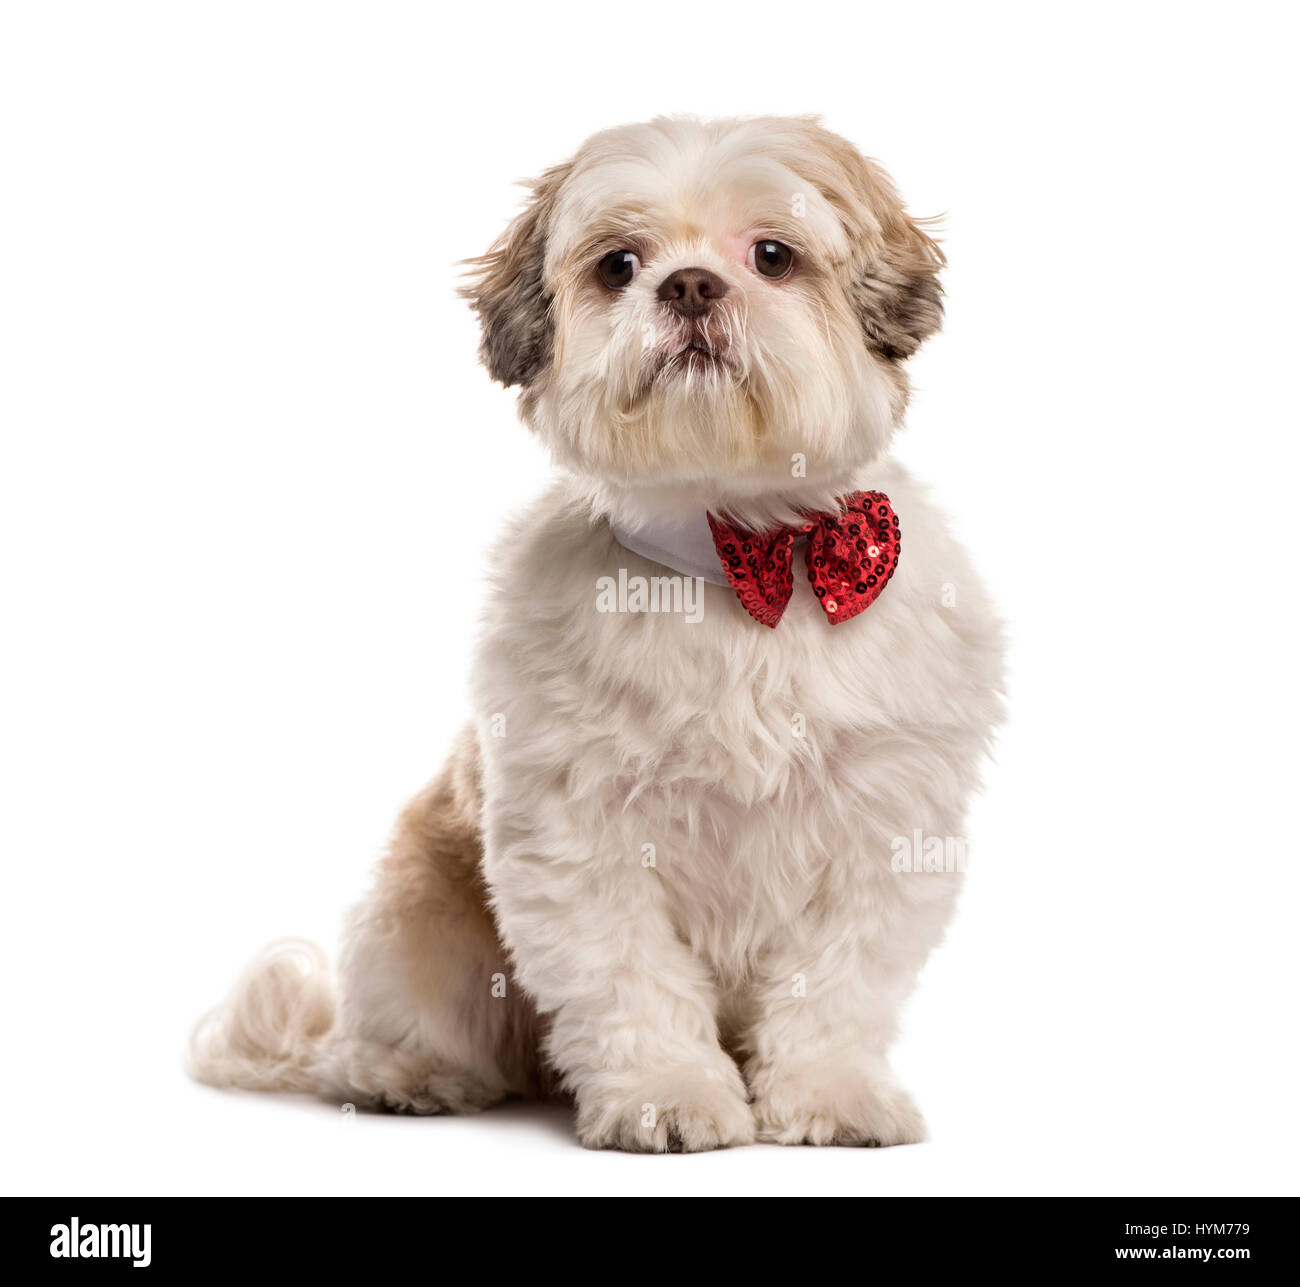 Shih Tzu sitting with a bow tie, isolated on white Stock Photo